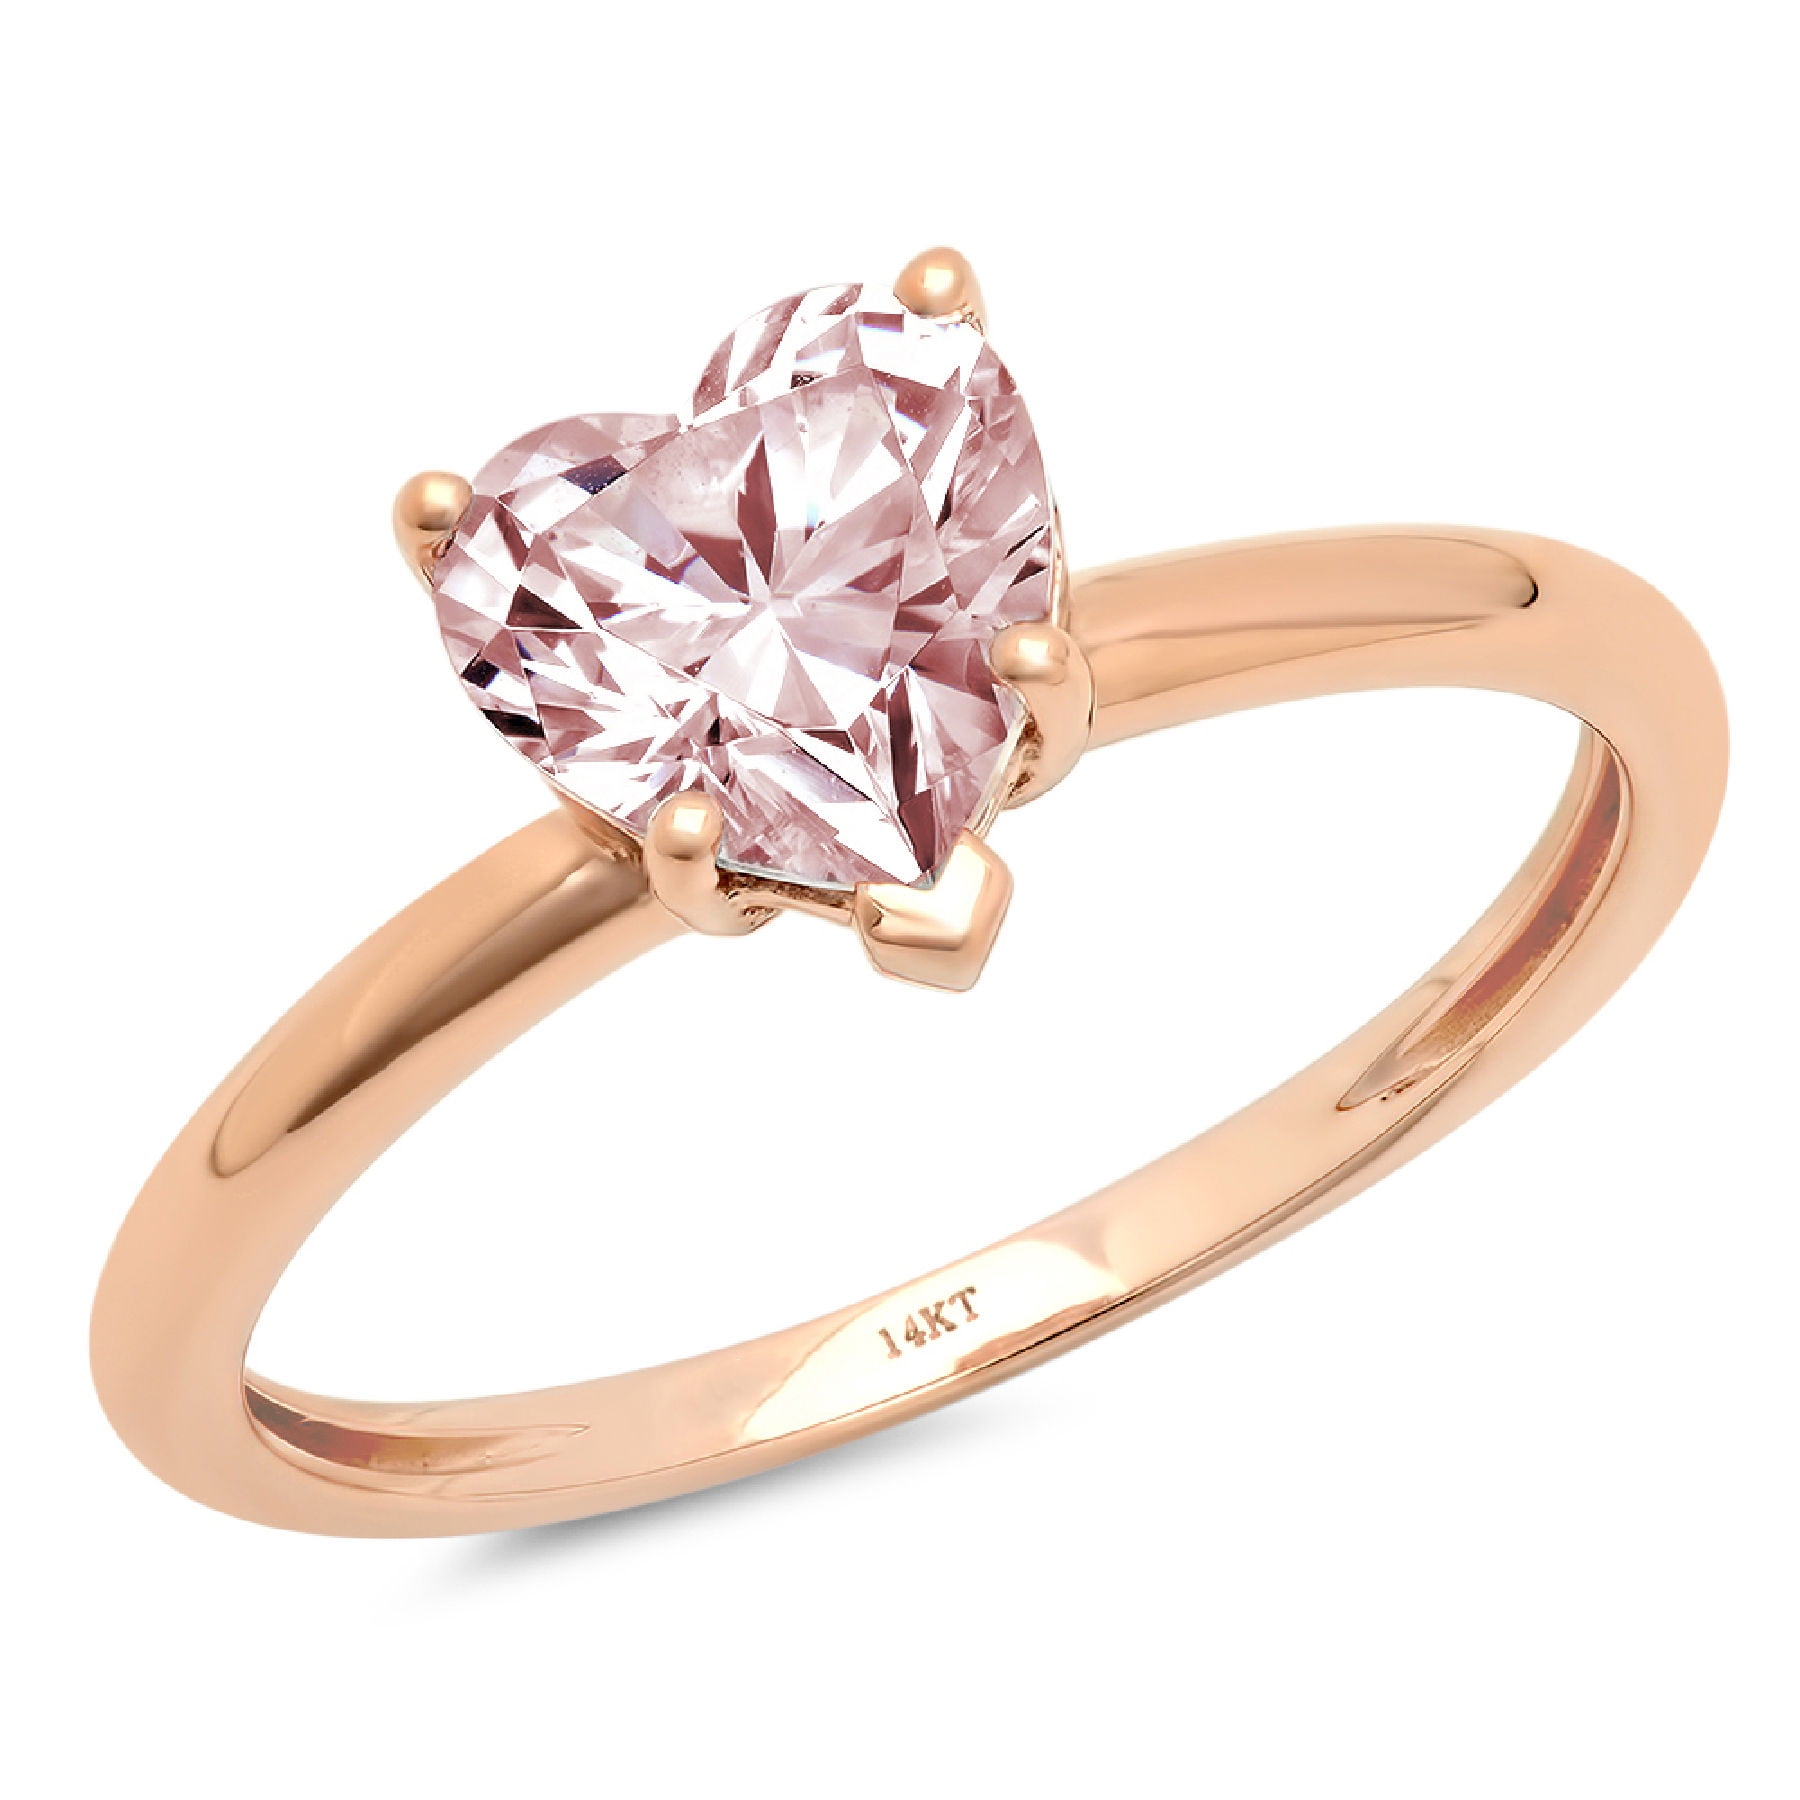 2.0 ct Brilliant Heart Cut VVS1 Pink Simulated Diamond Rose Solid 14k or 18k Gold Robotic Laser Engraved Handmade Anniversary Solitaire Ring